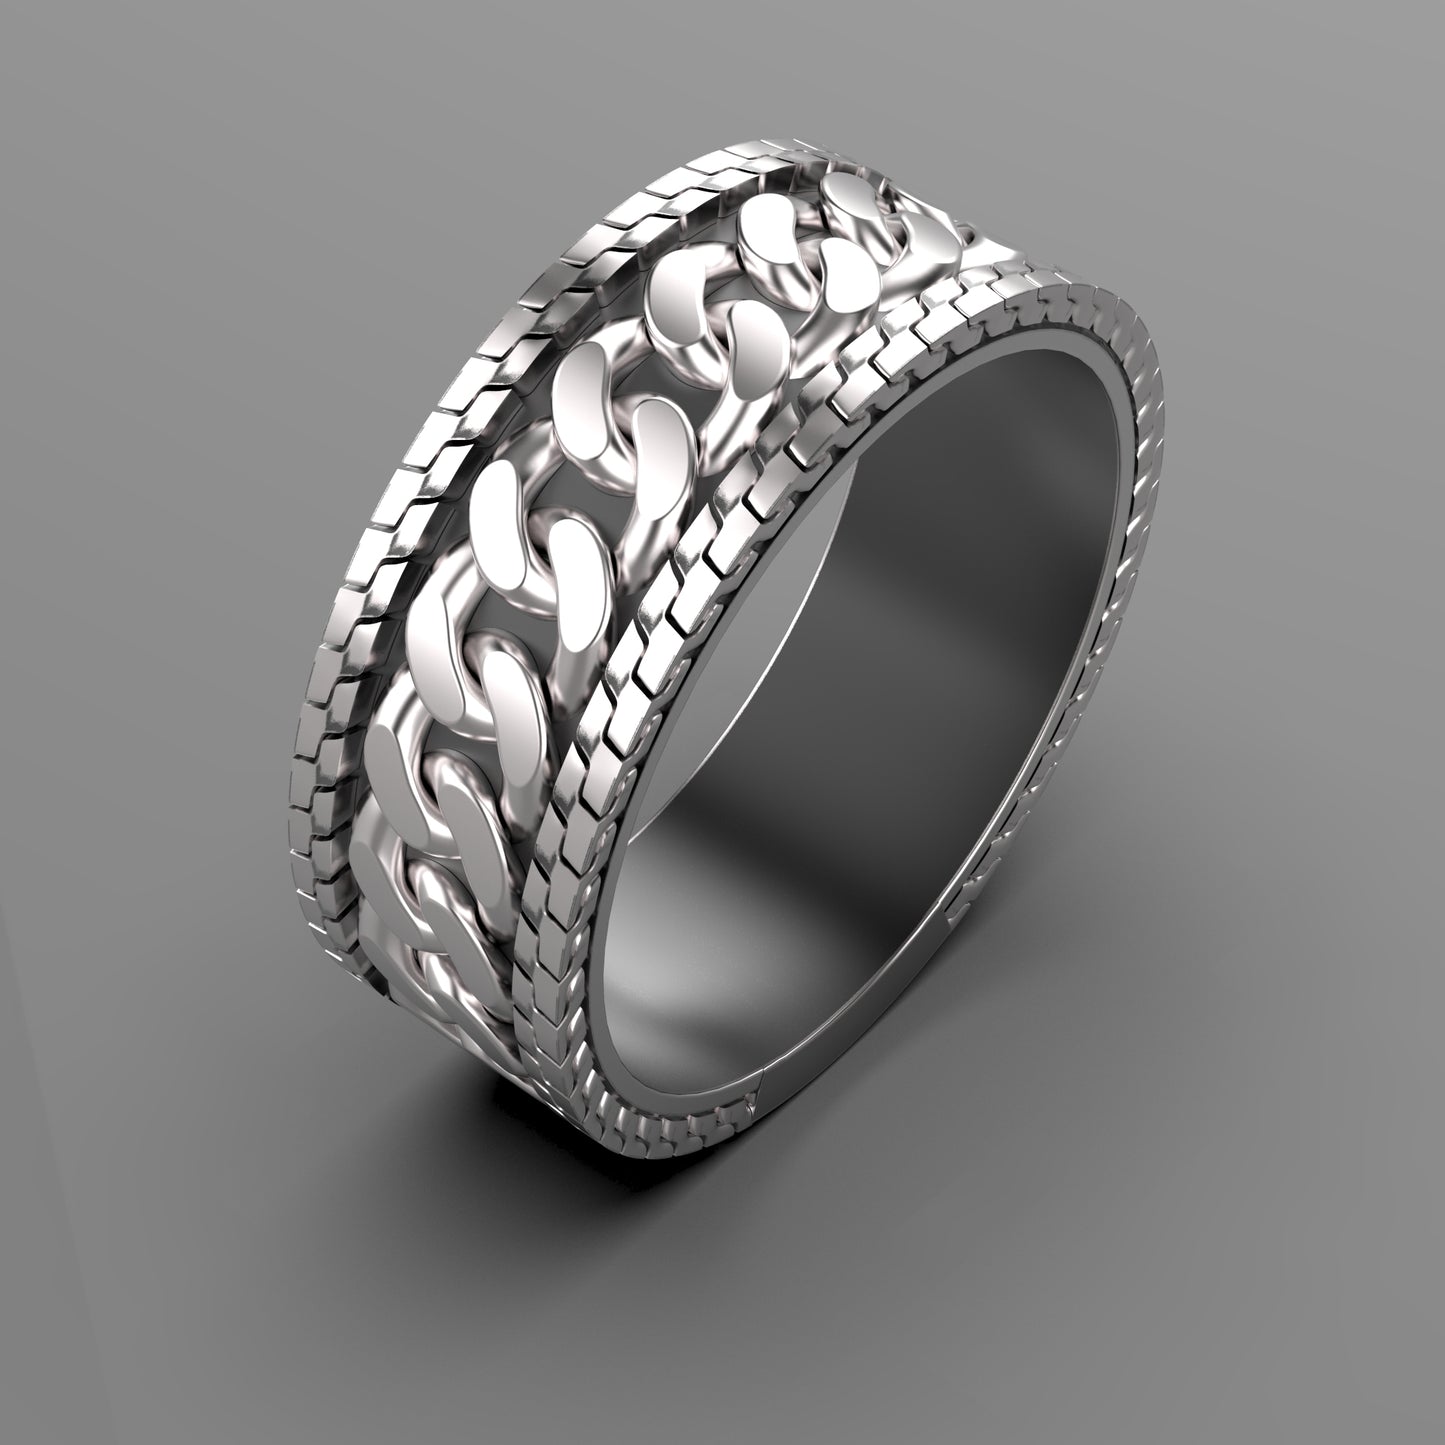 Cuban Link Ring, Chain Band Mens Sterling Silver Ring